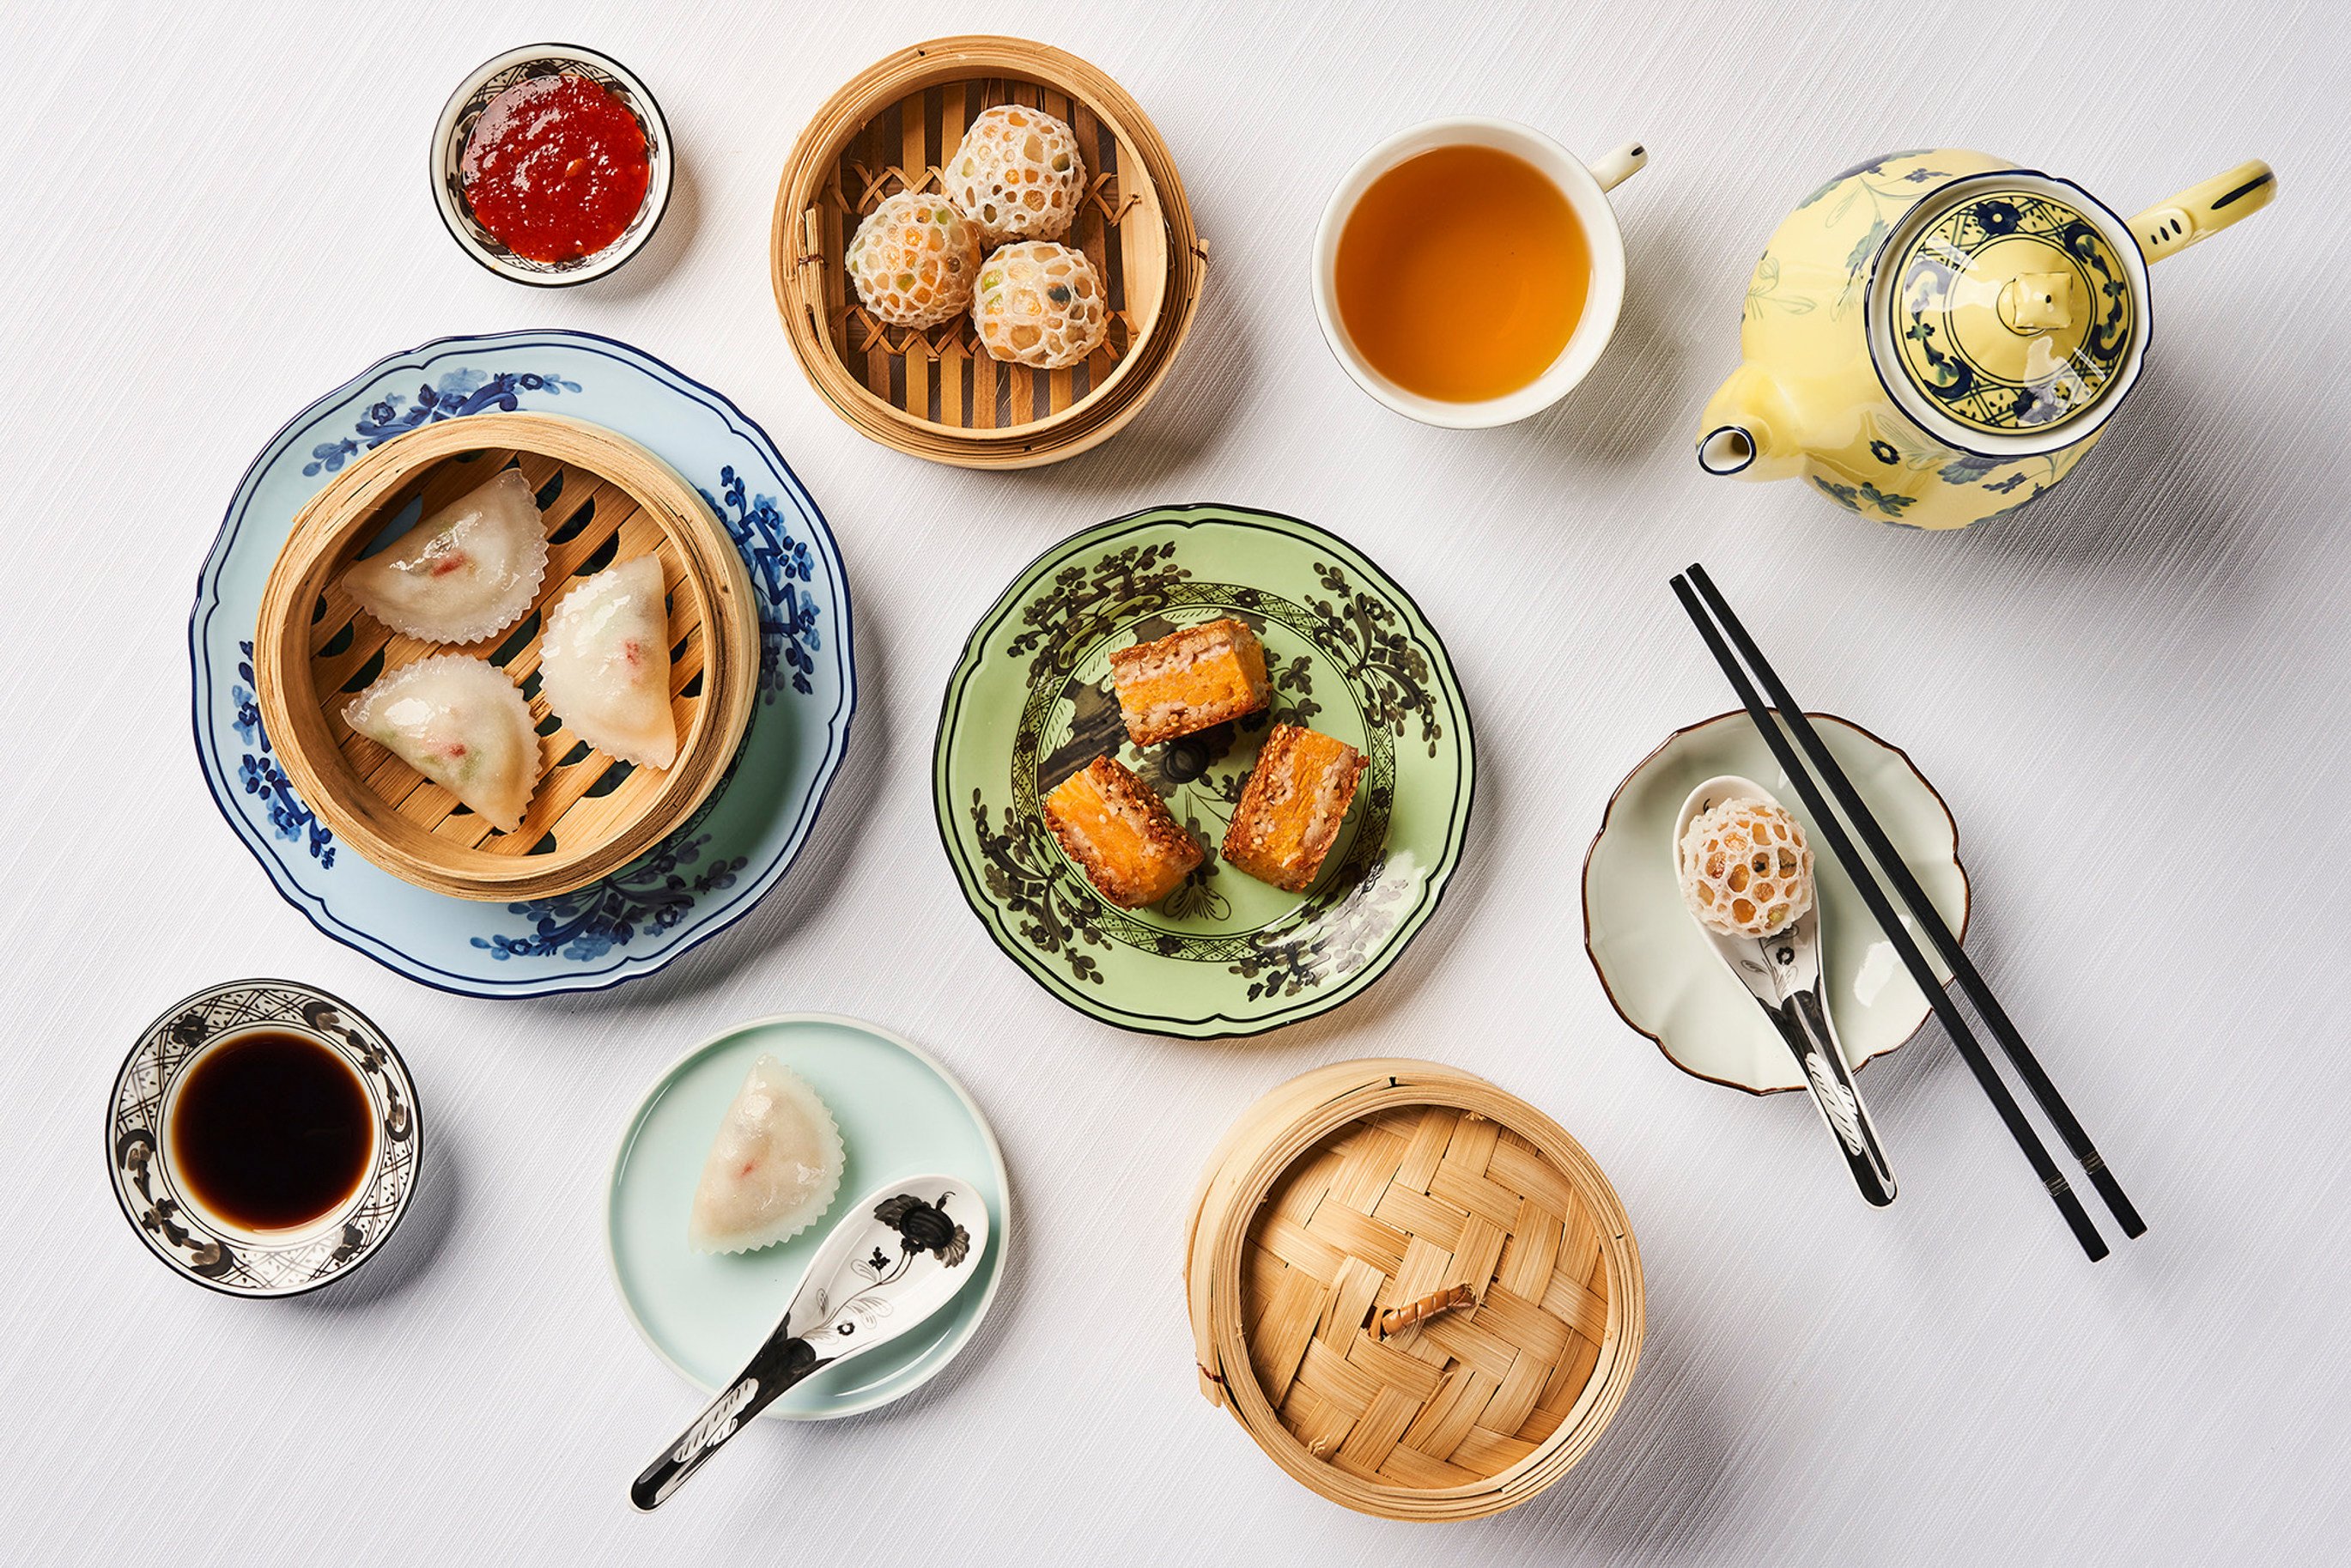 Dim sum is the quintessential daytime dining tradition which prioritises small bites over lengthy chats and plenty of tea; and nowhere does it better than the spiritual home of Cantonese cuisine, Hong Kong. Photo: Summer Pavilion